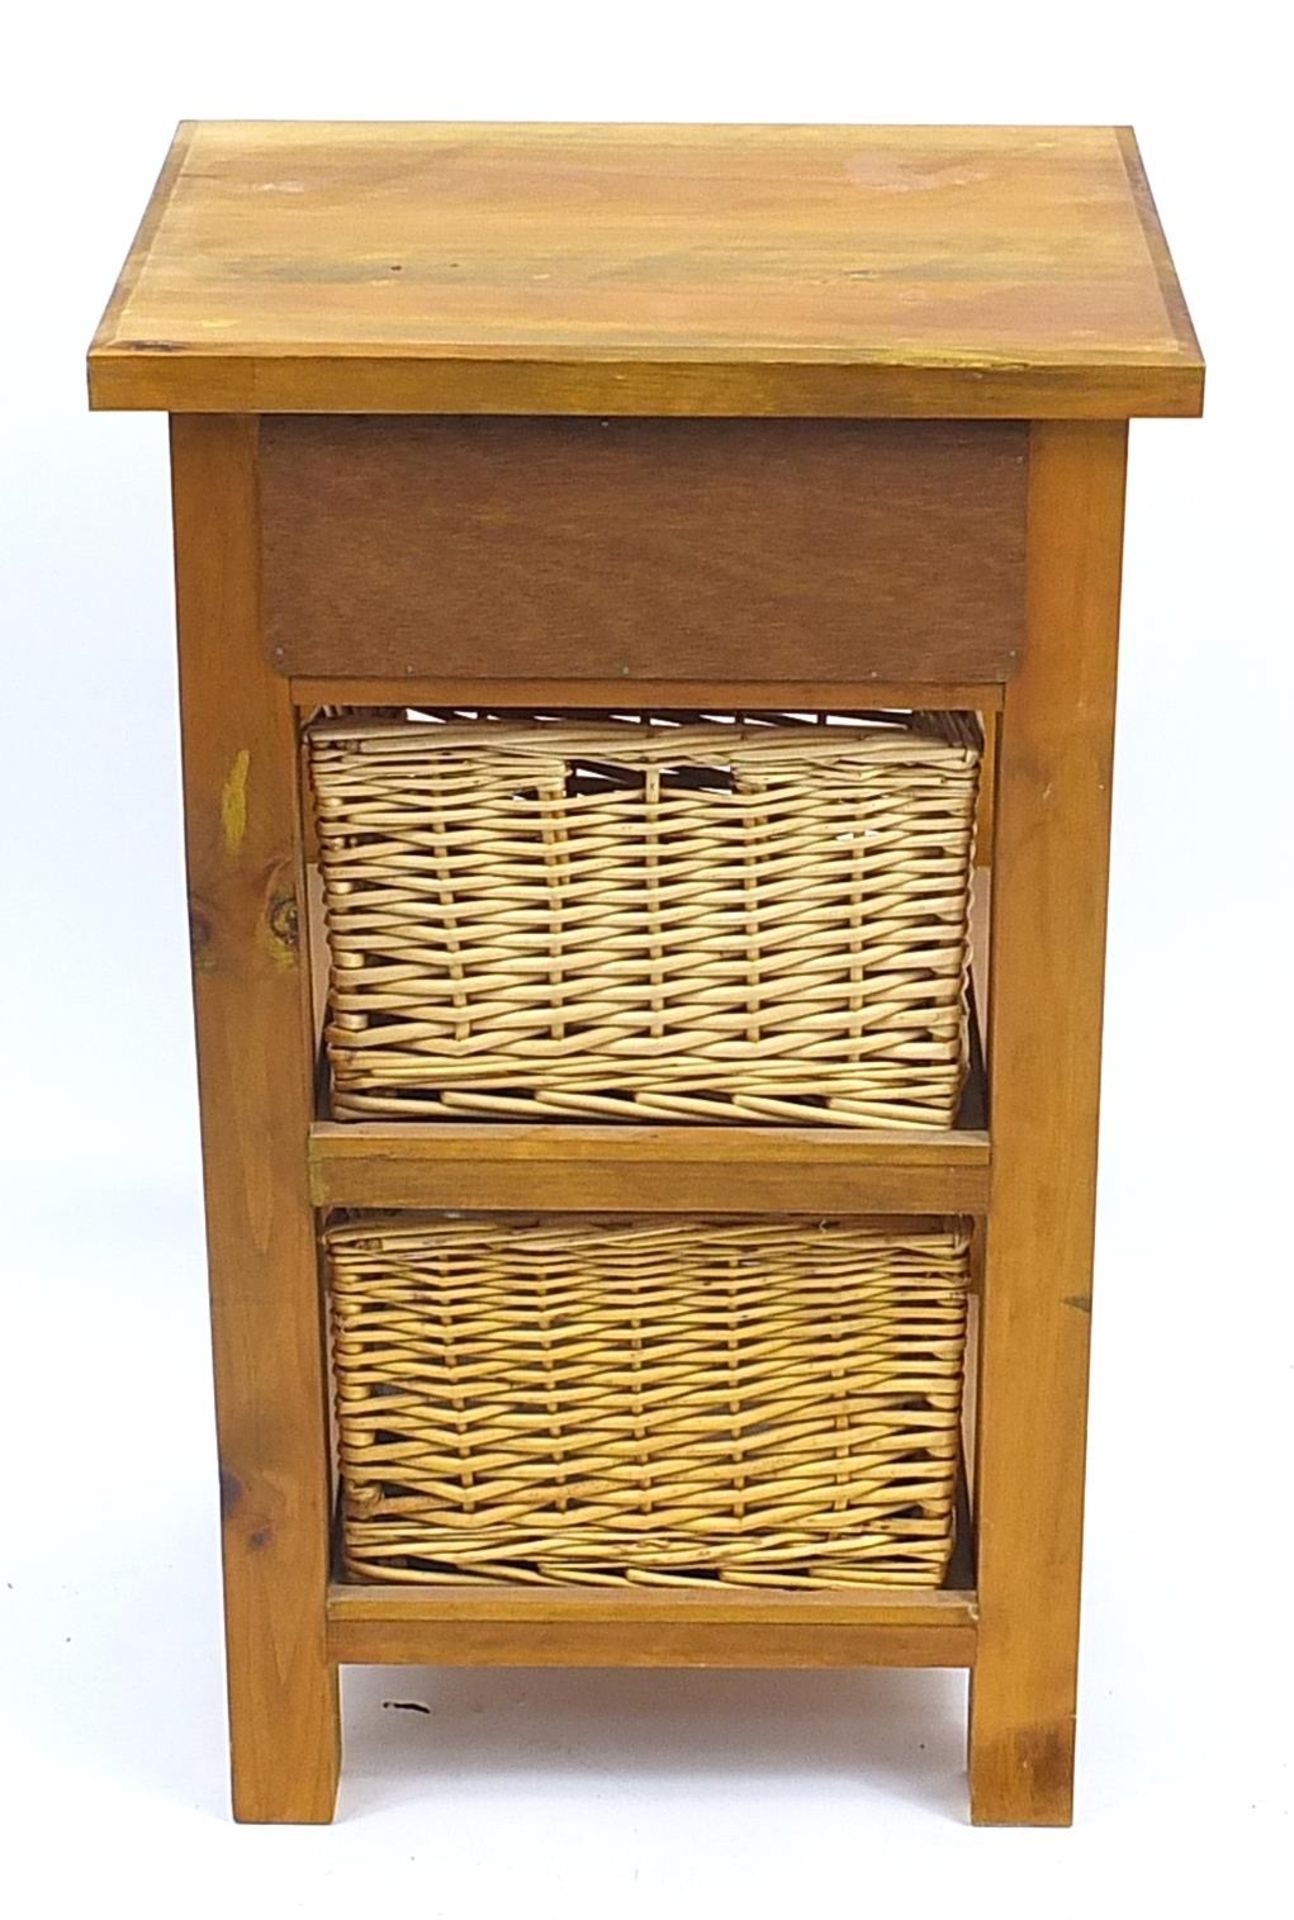 Pine side table with drawer and two wicker baskets, 80cm H x 50cm W x 40cm D - Image 3 of 3